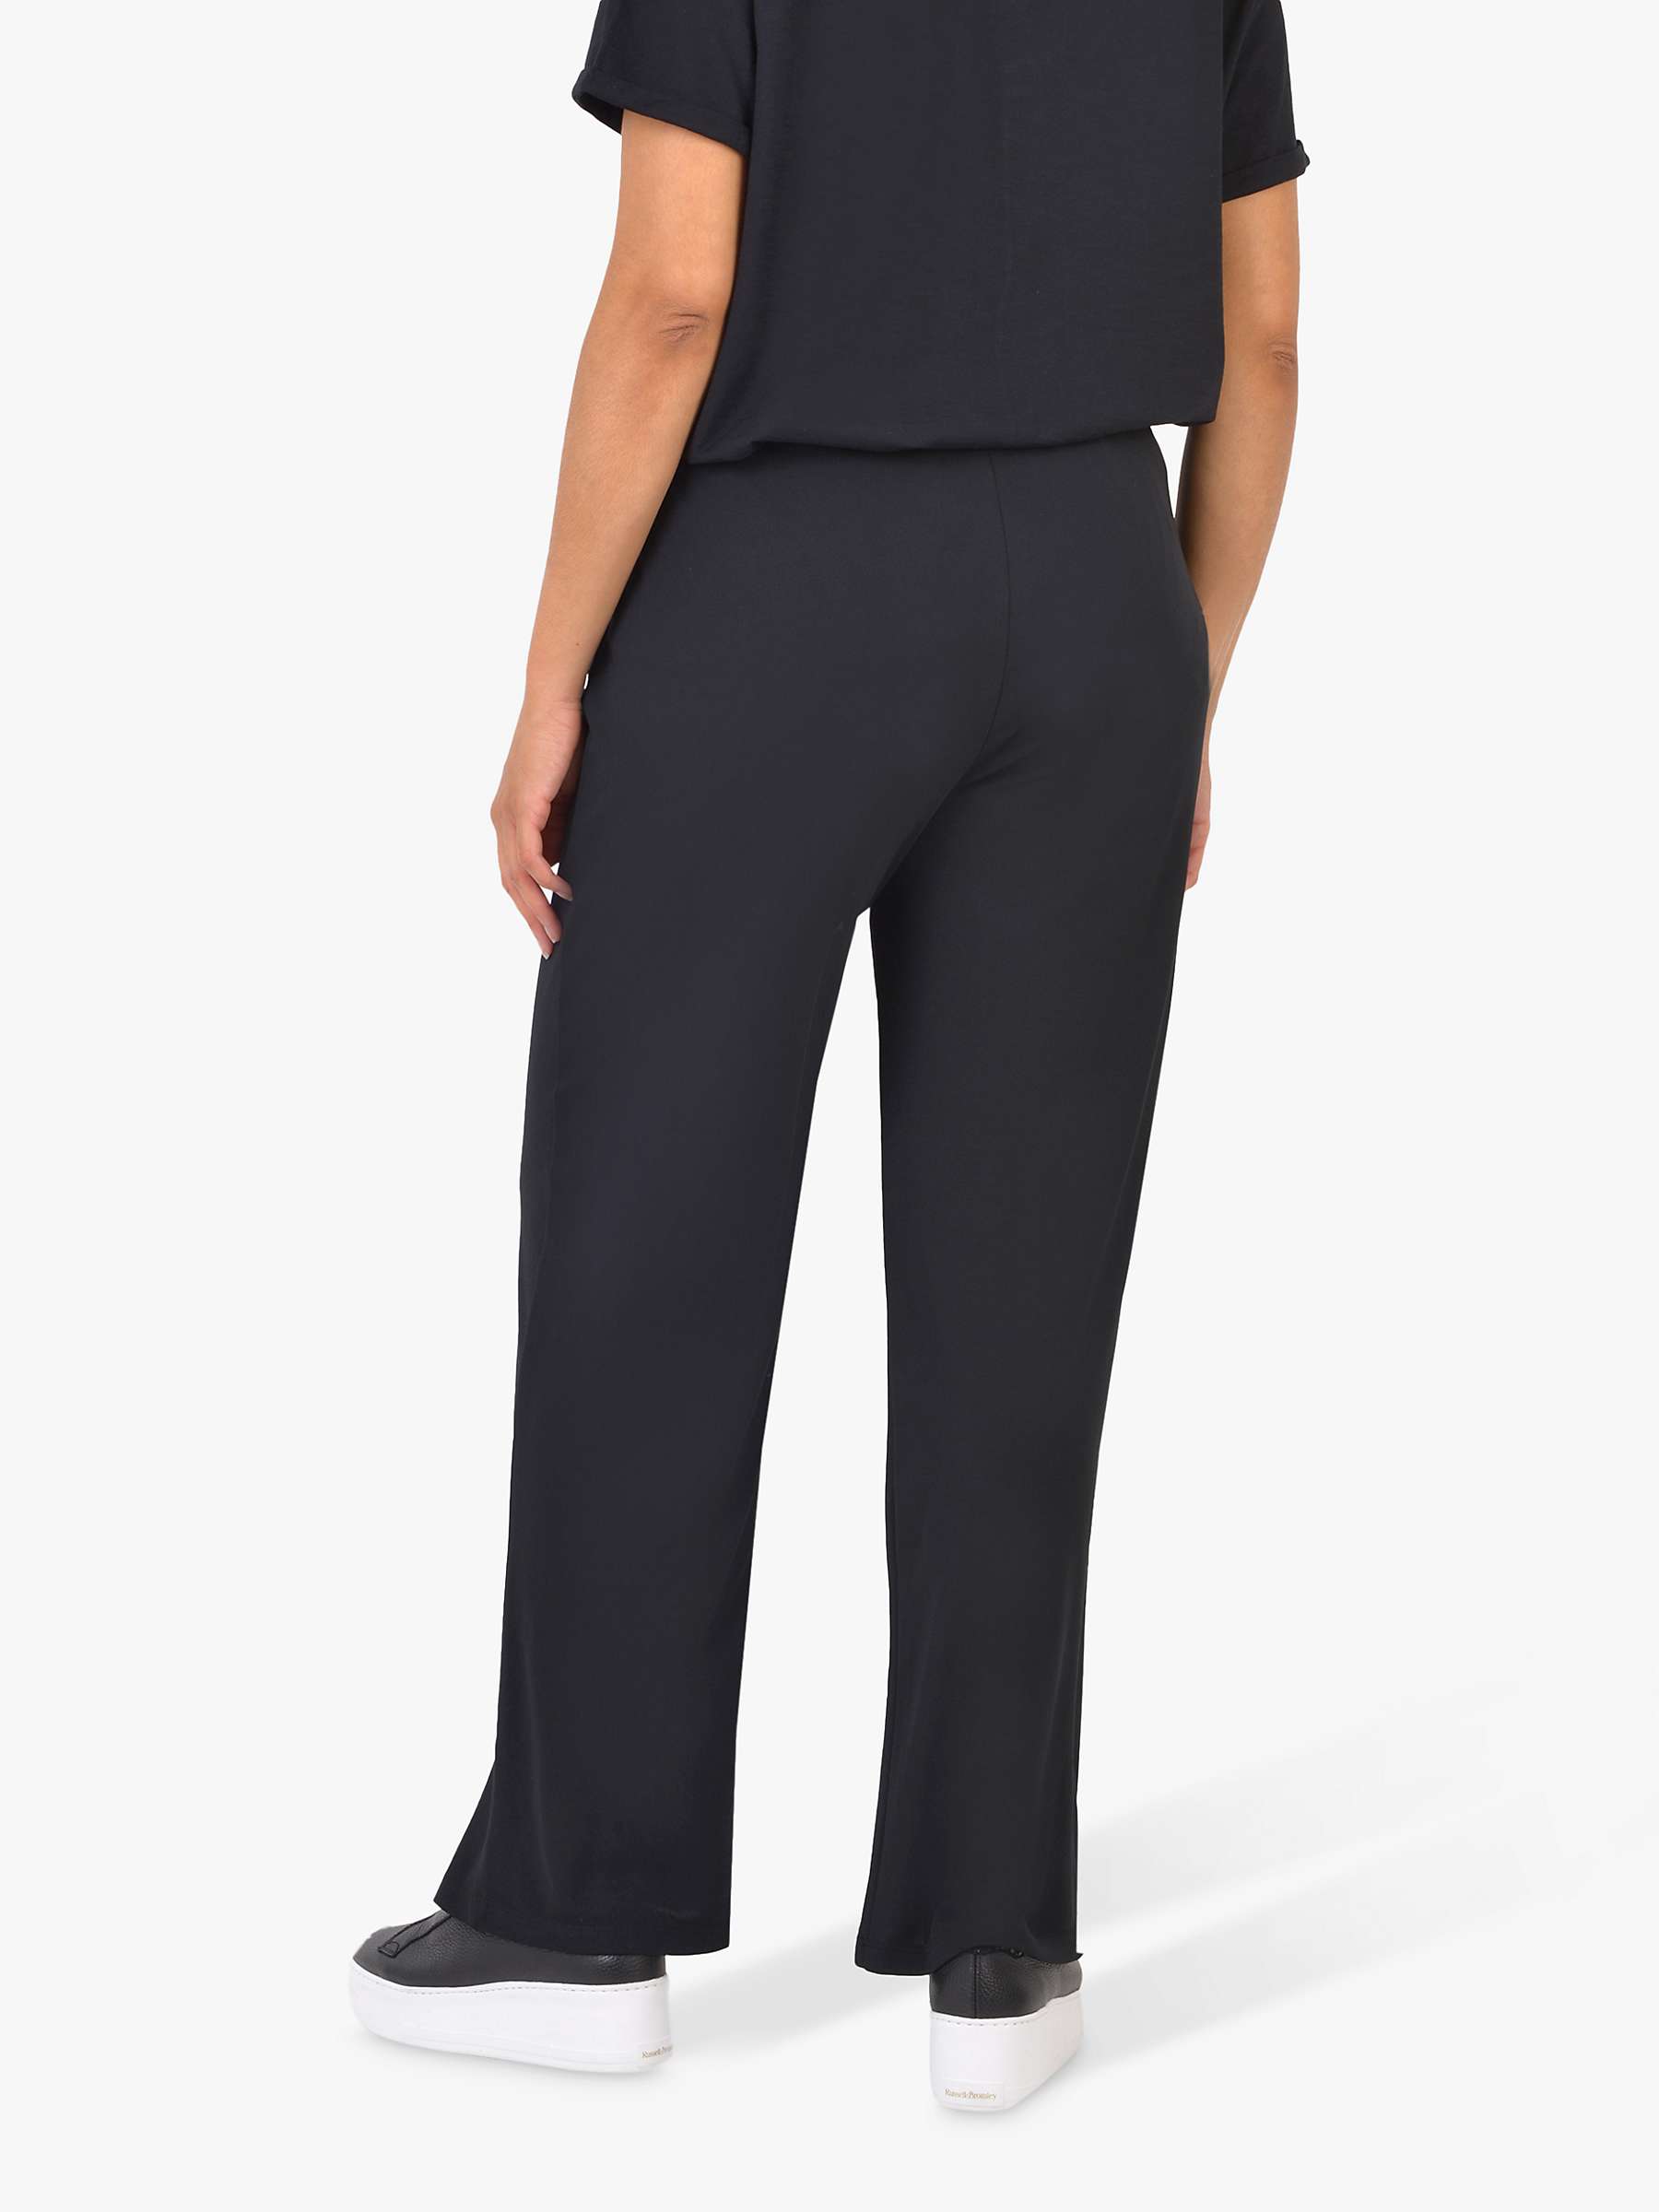 Buy Live Unlimited Curve Palazzo Wide Leg Trousers, Black Online at johnlewis.com